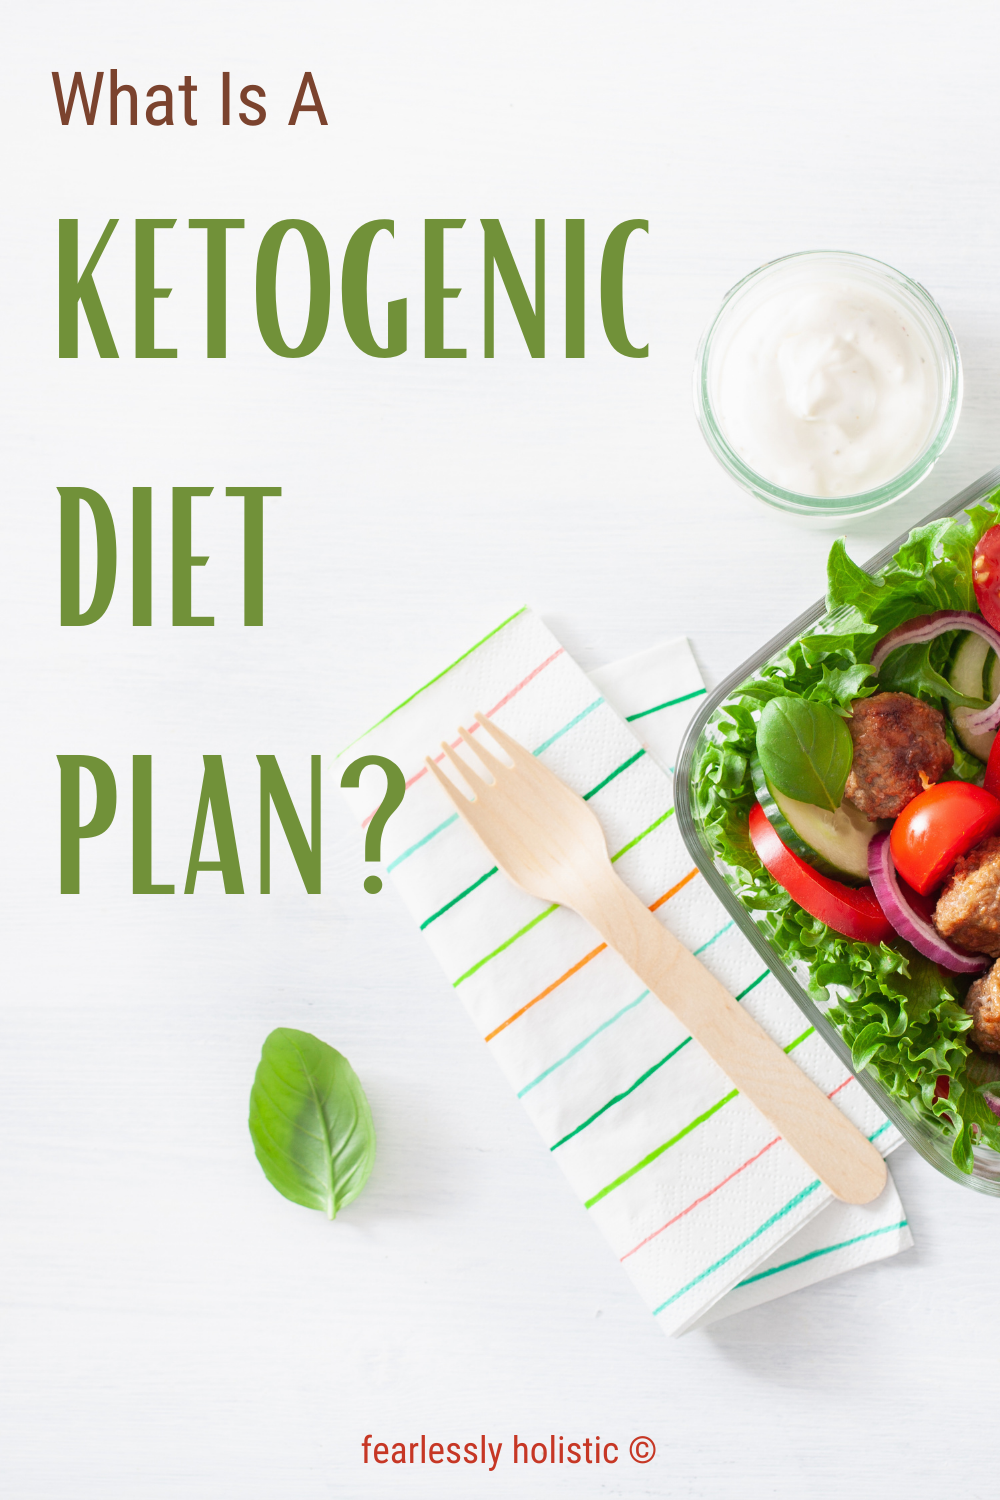 What Is The Ketogenic Diet Plan?